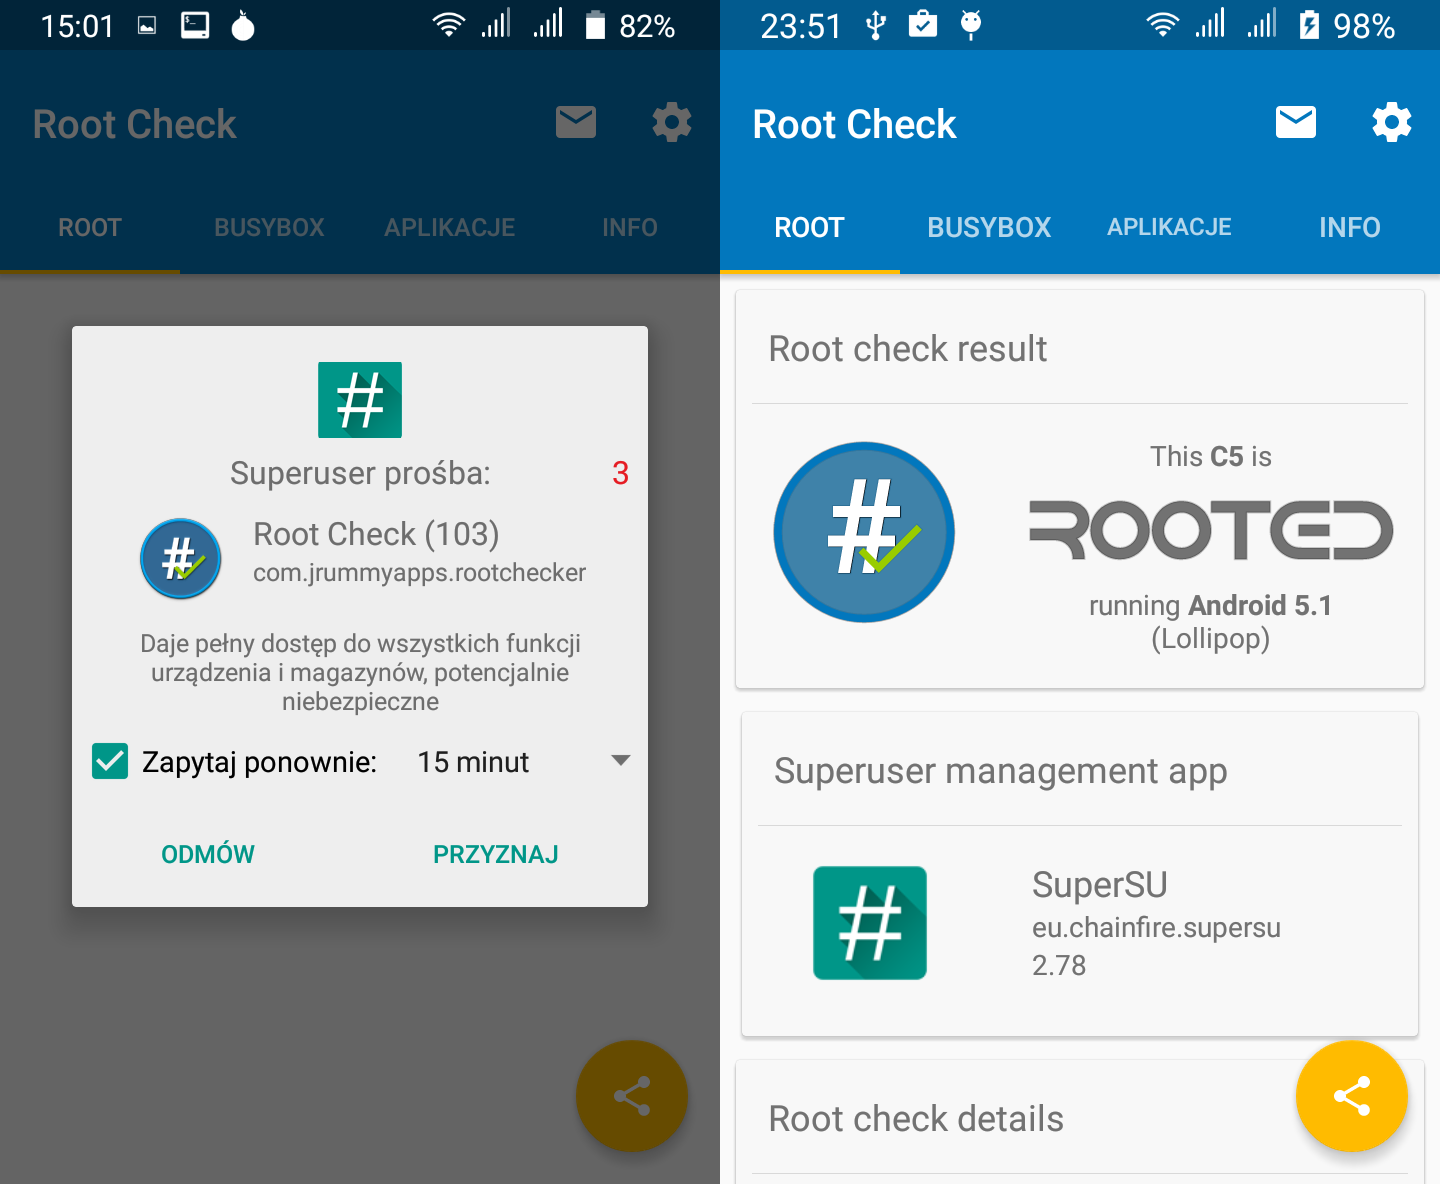 neffos-c5-smartfon-android-root-success-root-check-1